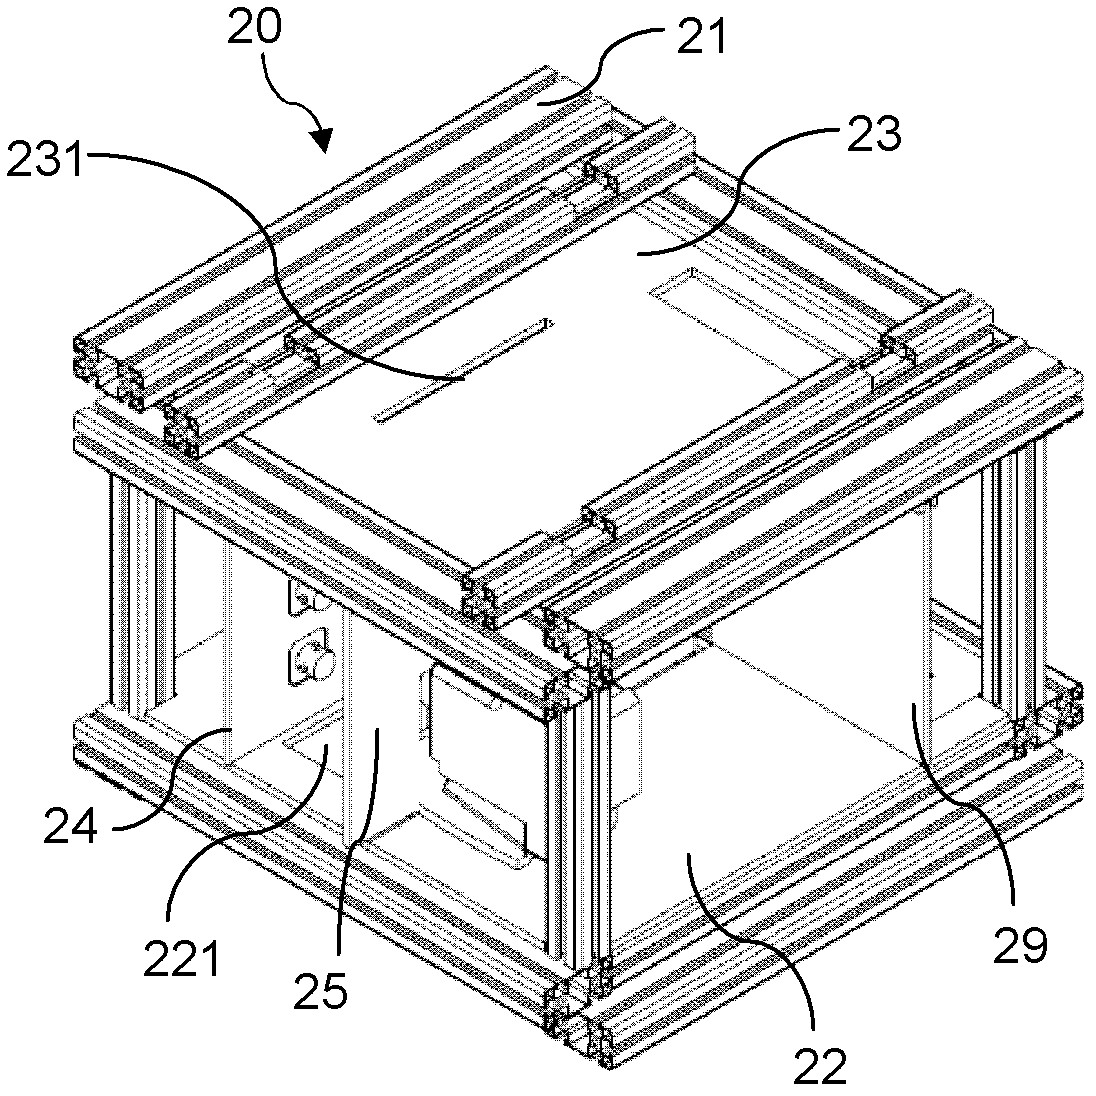 Modularized semiconductor processing device